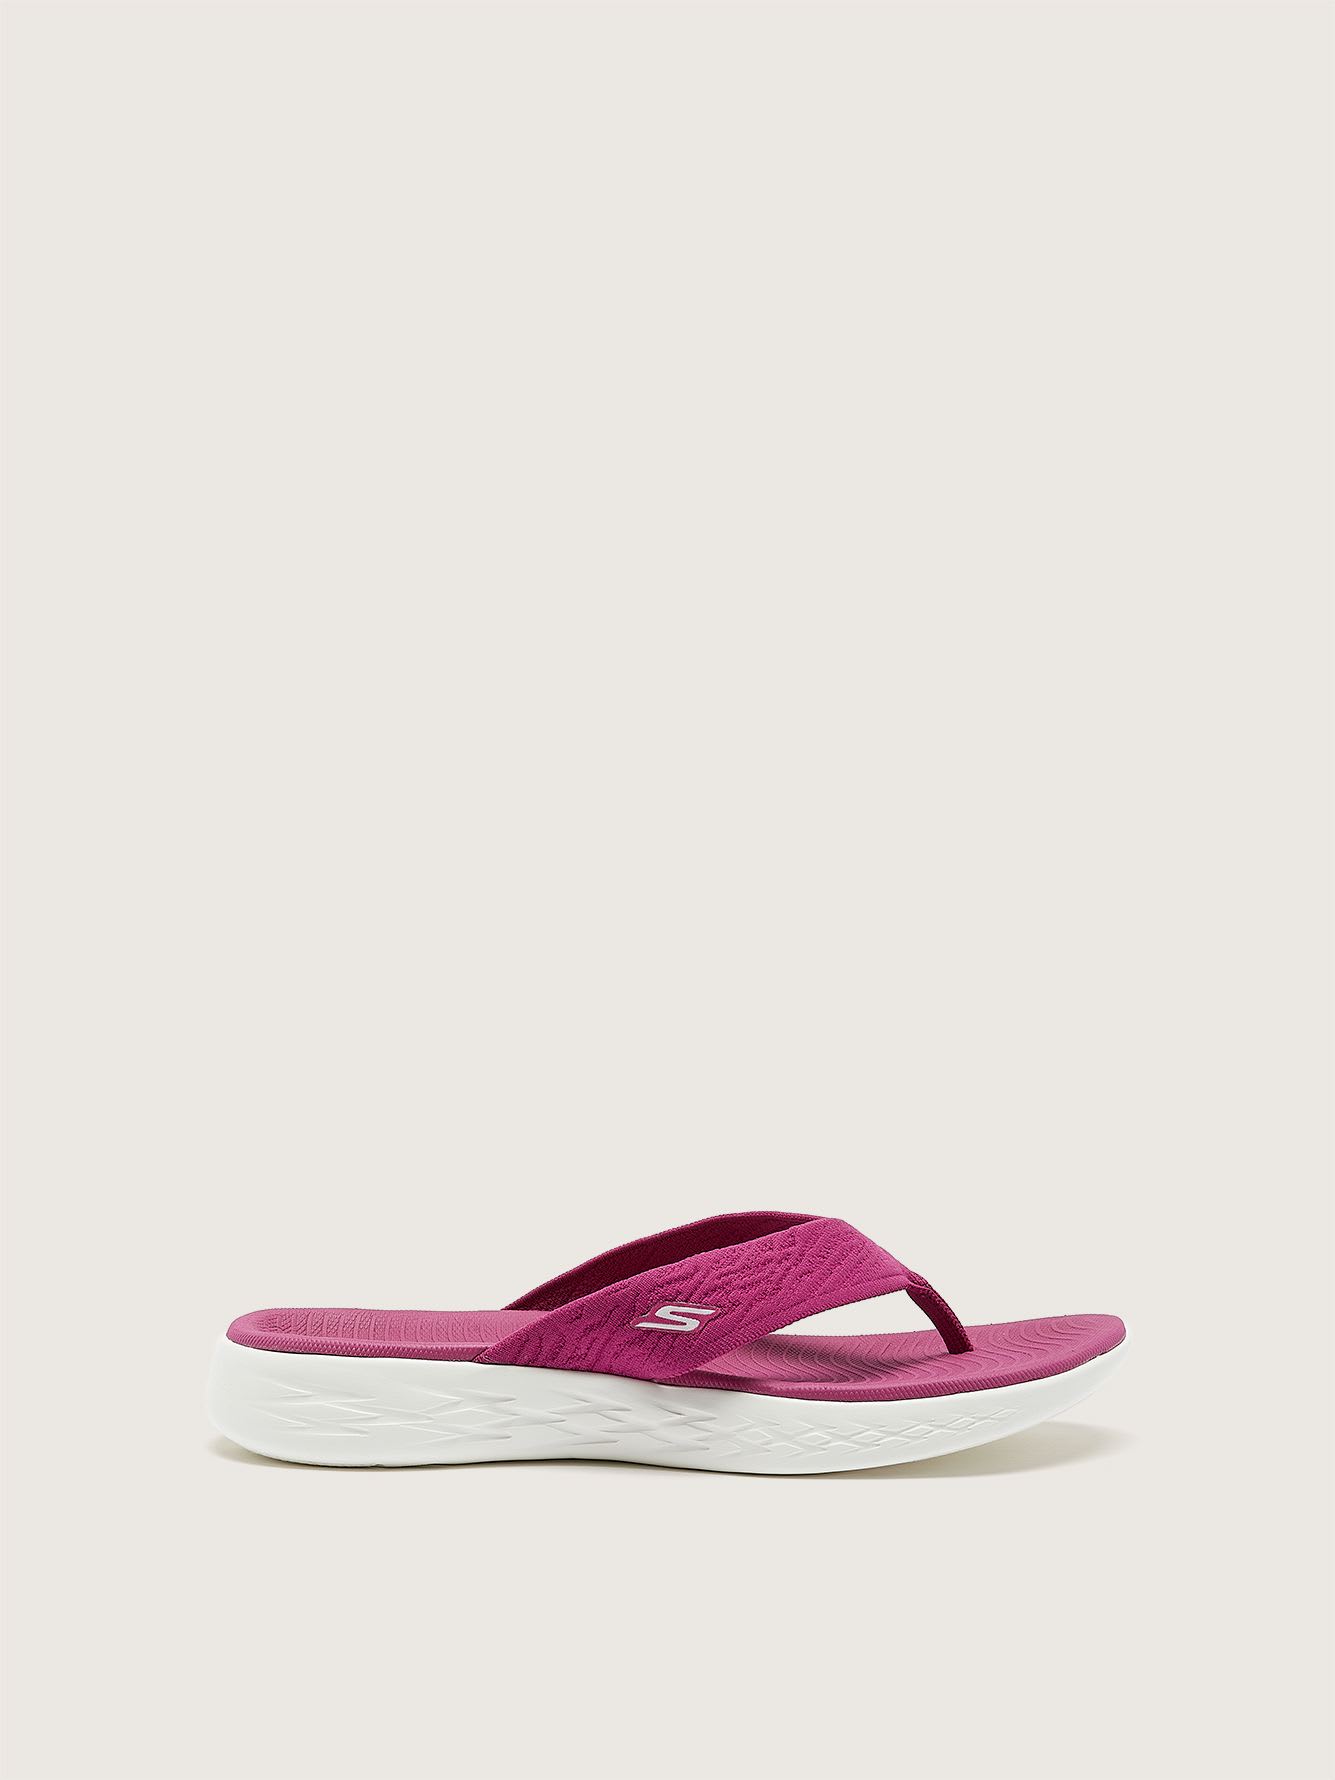 Wide Width, On-The-Go Sunny Thong Sandal - Skechers